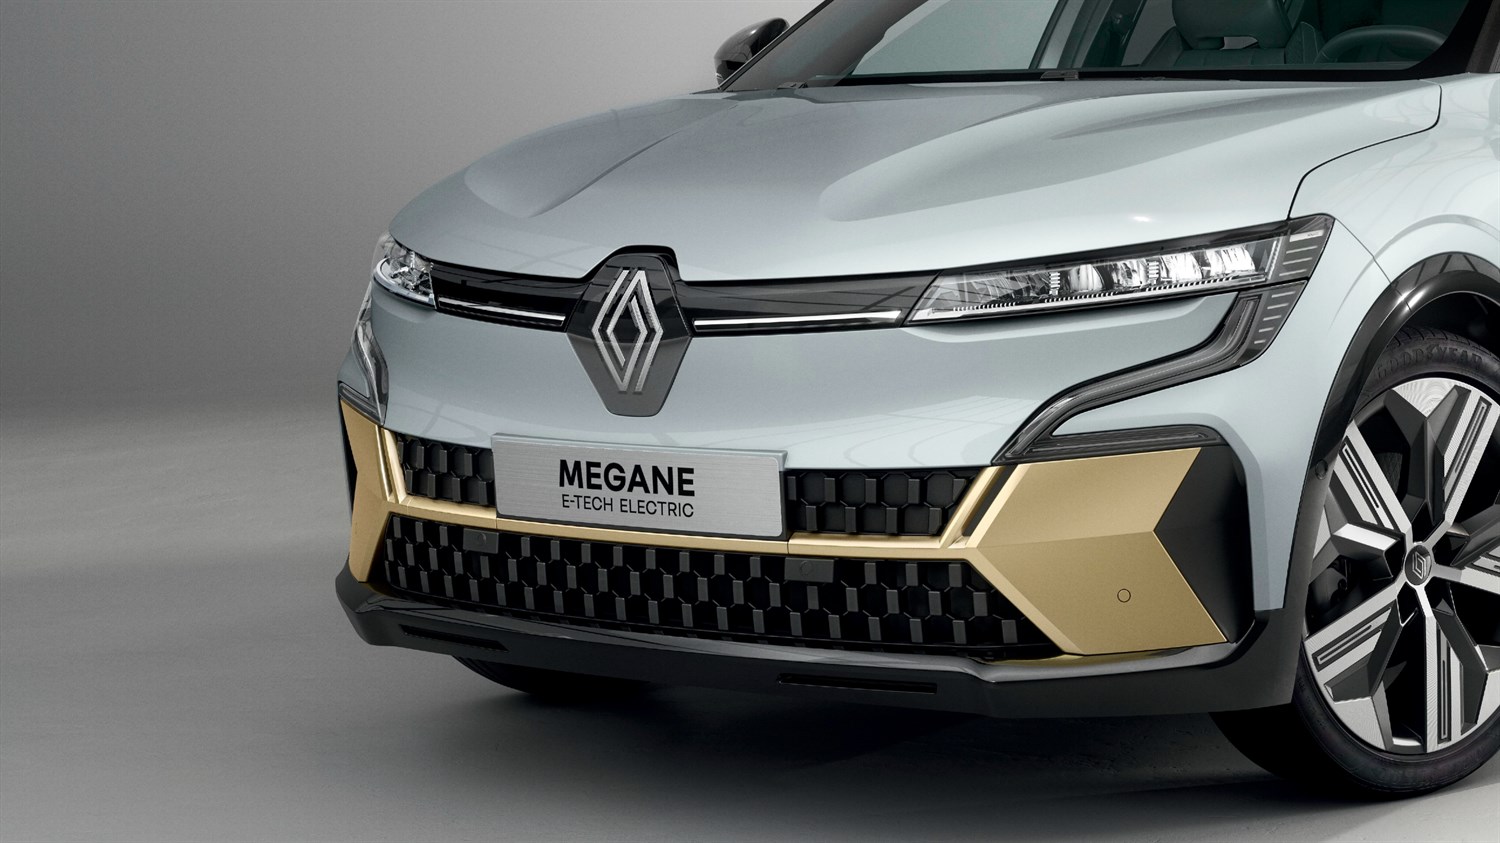 All-New Renault Megane E-Tech Electric unveiled at the IAA Munich Mobility Show 2021